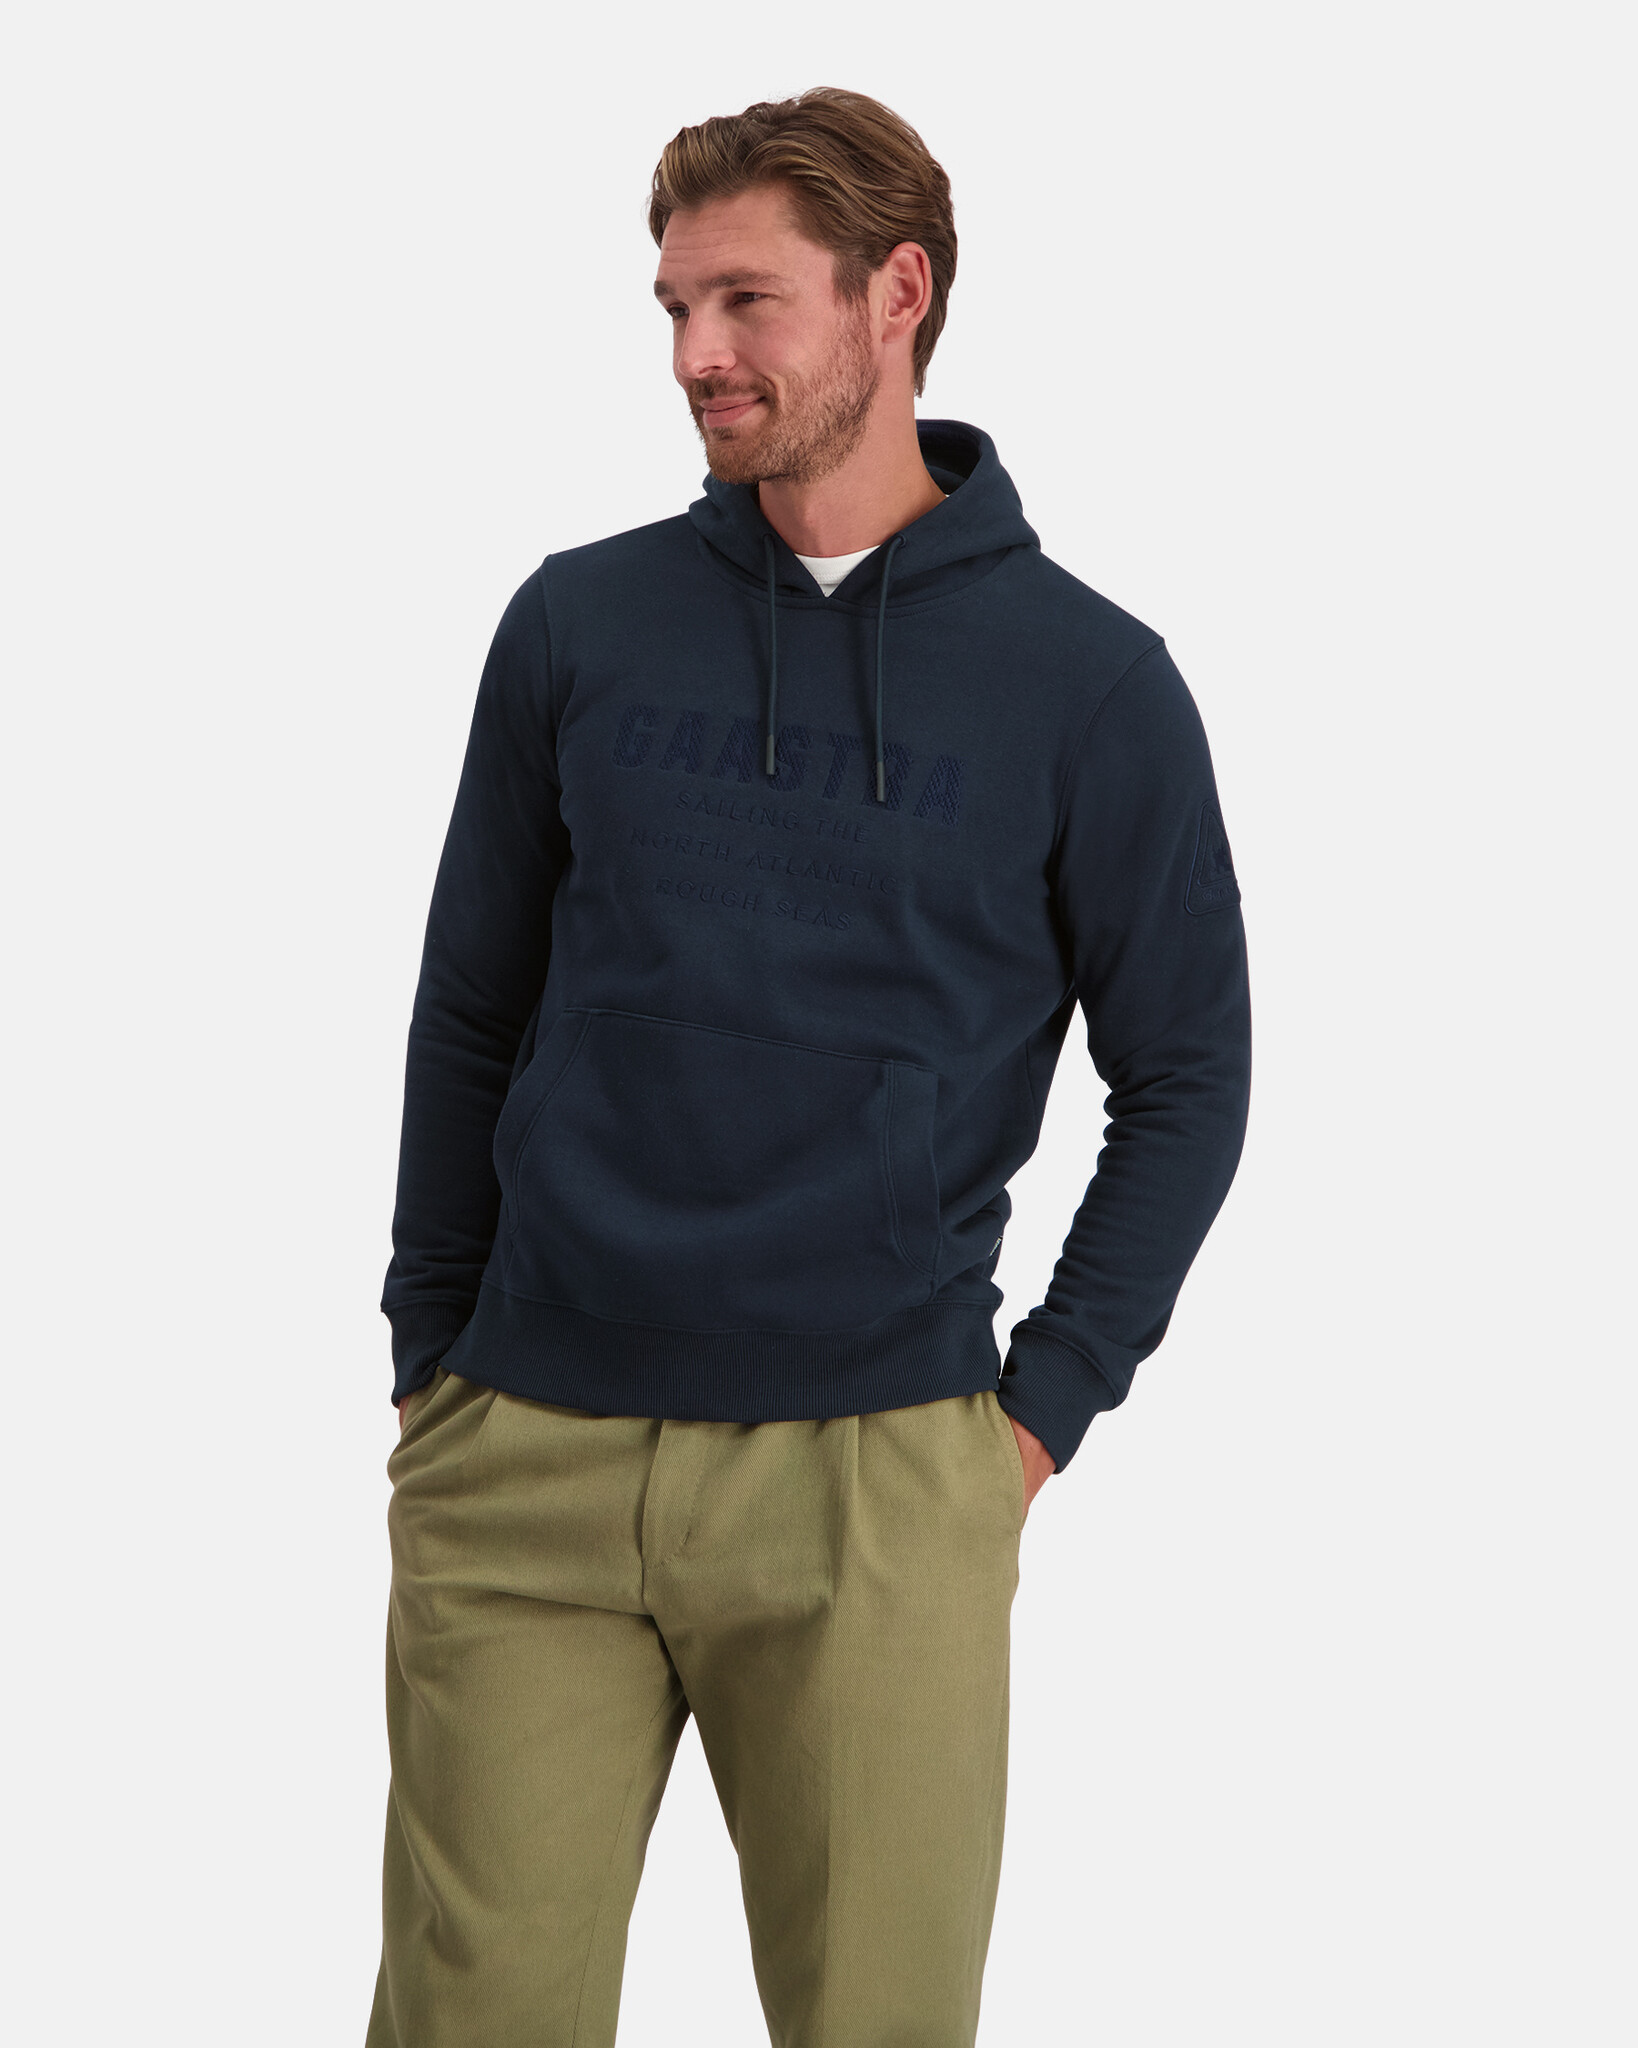 The soft cotton Antartic hoodie